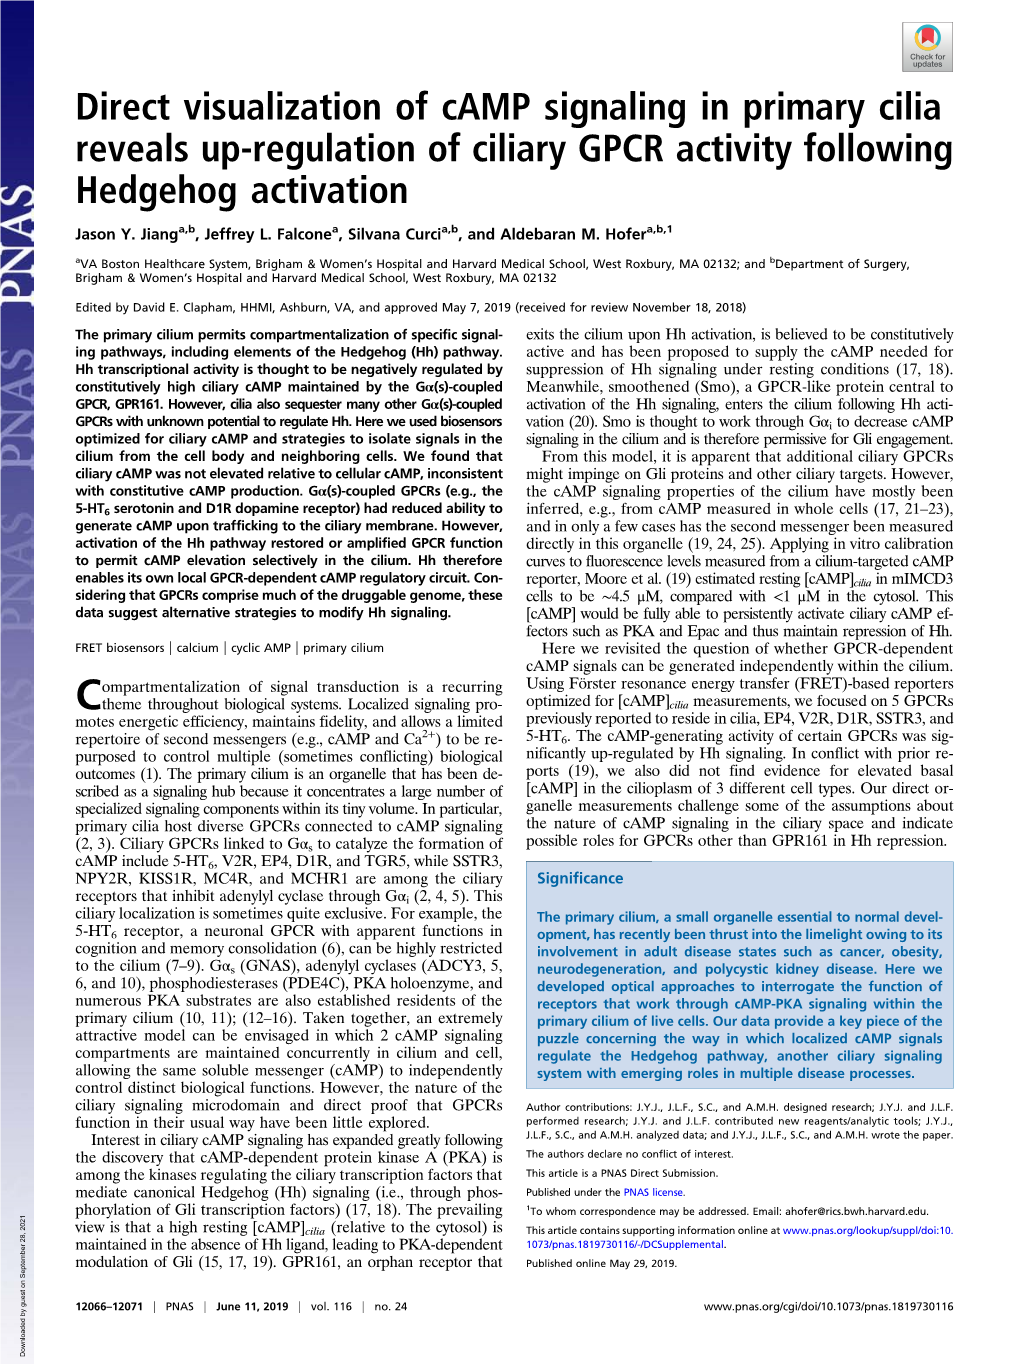 Direct Visualization of Camp Signaling in Primary Cilia Reveals Up-Regulation of Ciliary GPCR Activity Following Hedgehog Activation